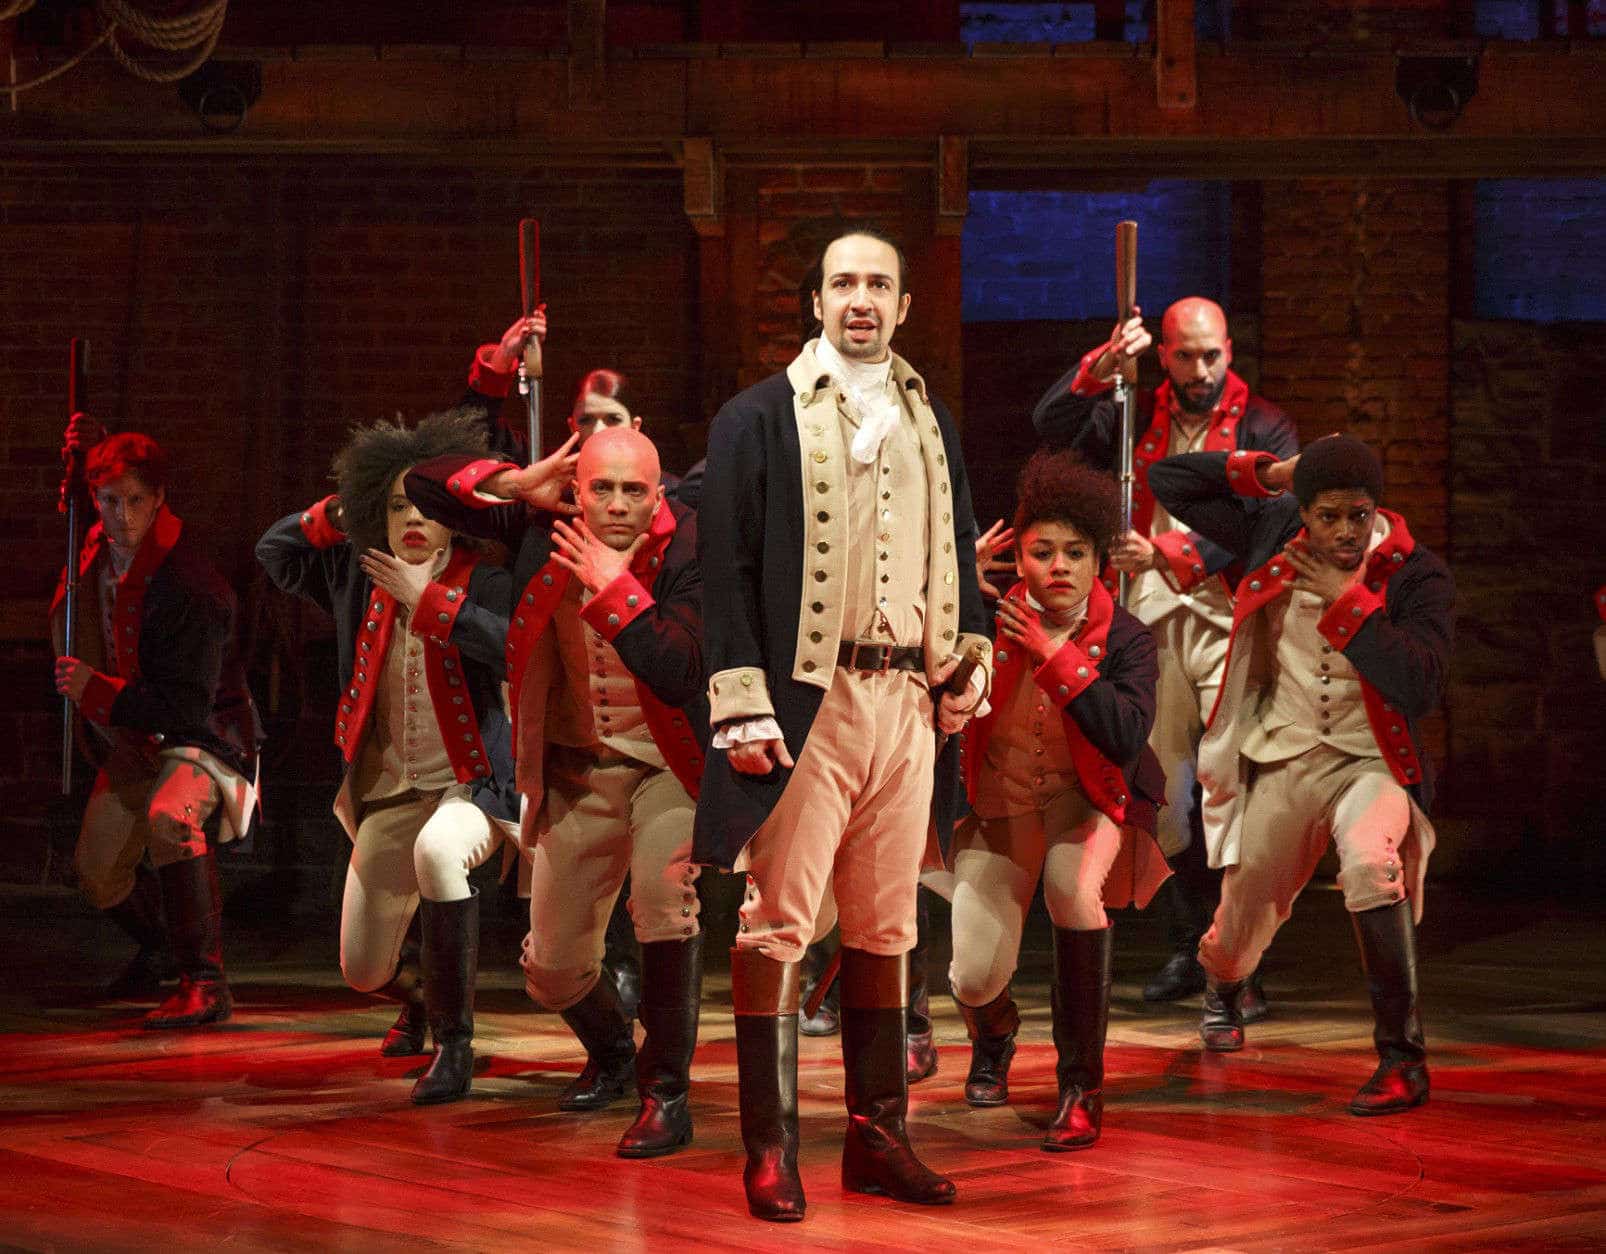 This image released by The Public Theater shows Lin-Manuel Miranda, foreground, with the cast during a performance of "Hamilton," in New York. (Joan Marcus/The Public Theater via AP)